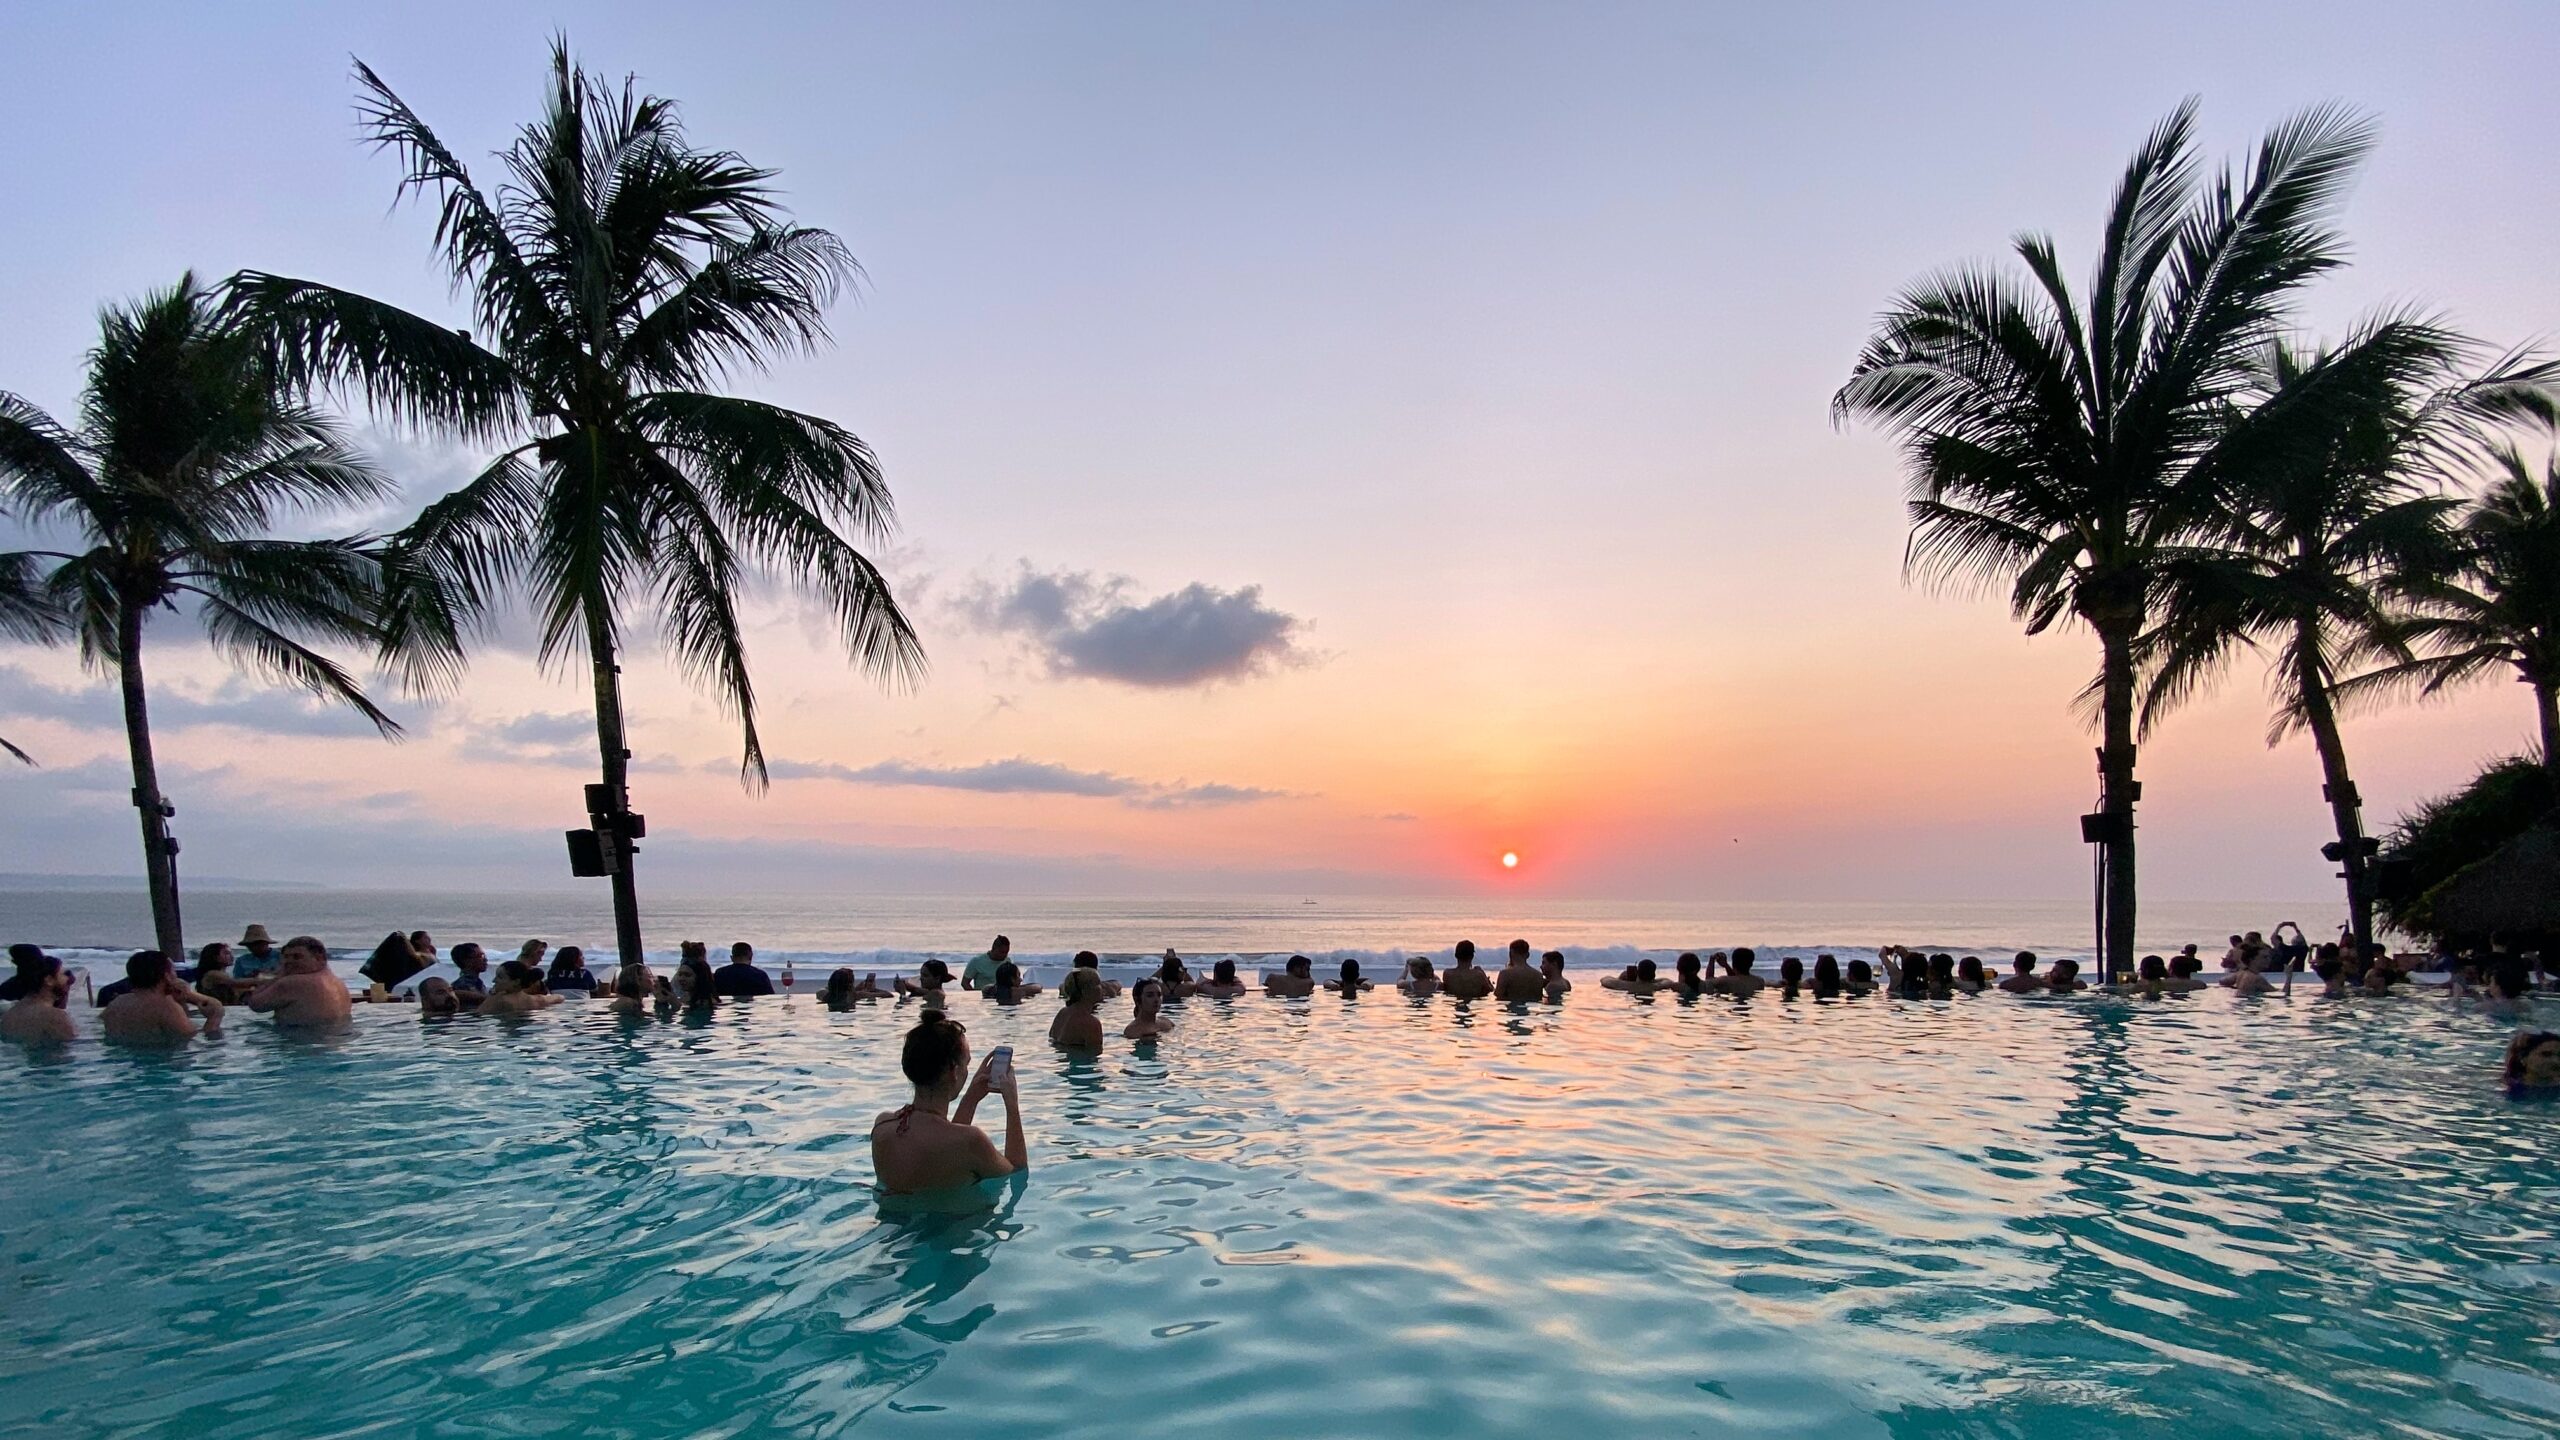 This photo is taken at the Potato Head Beach Club pool, overlooking the ocean as the sun was setting